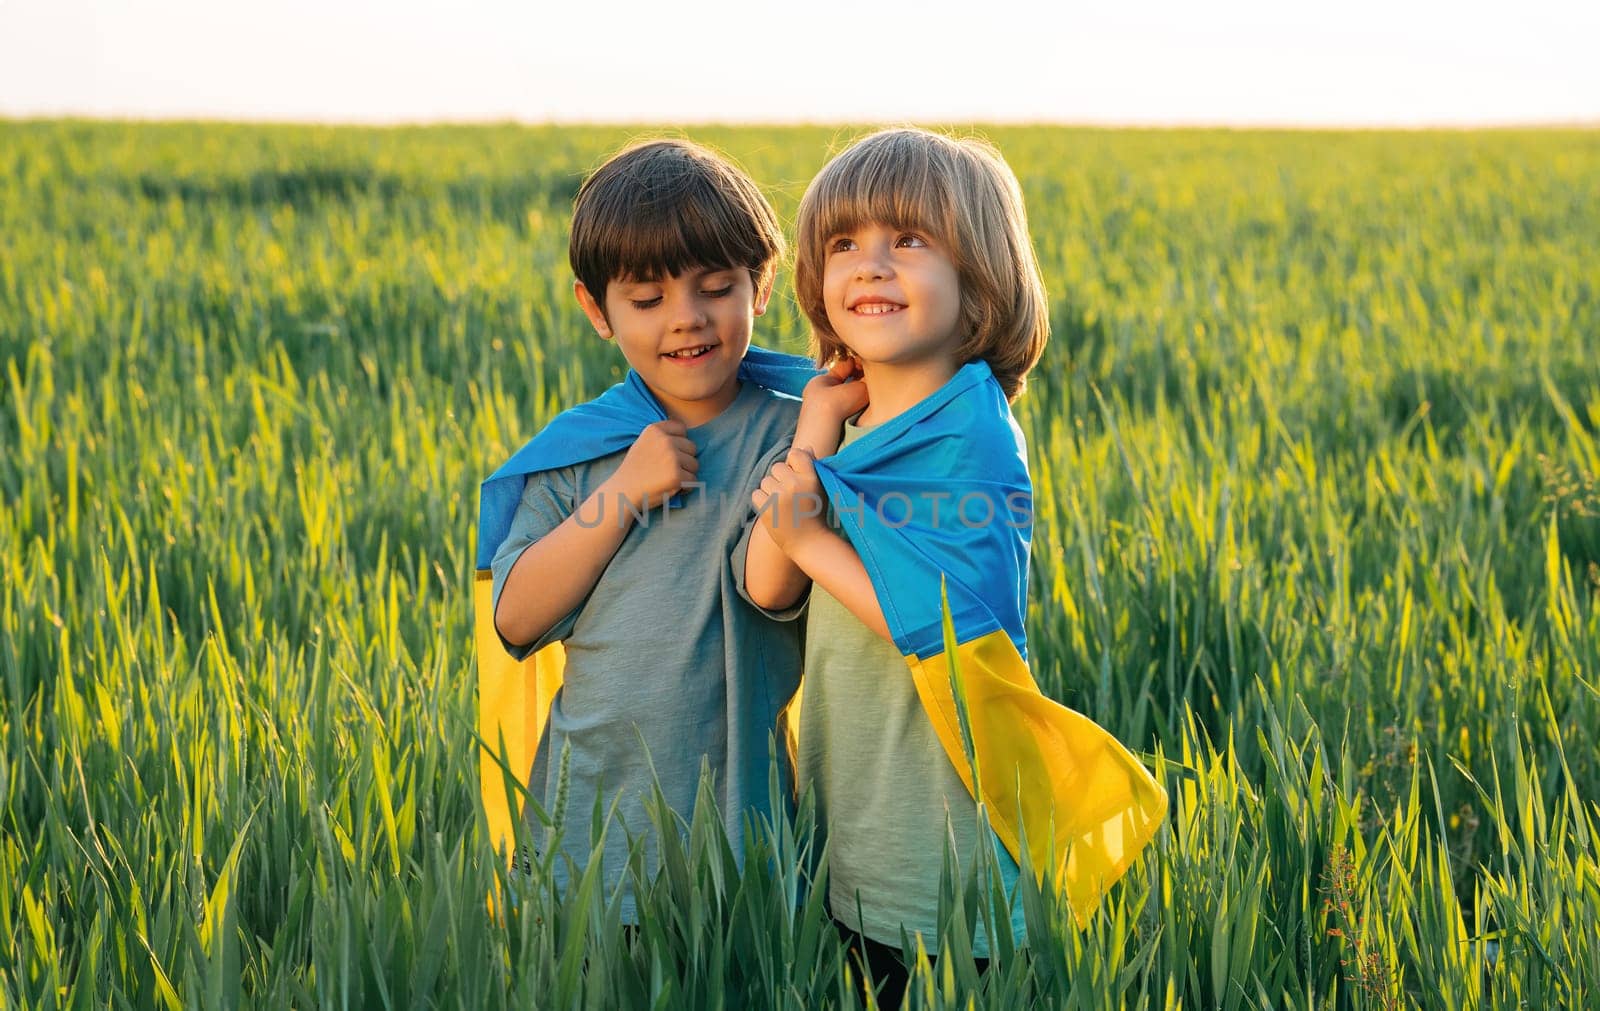 Happy glad boys - Ukrainian patriots children with national flag on in fresh green field. Ukraine, family, brothers twins, best friends, peace, freedom, win in war.